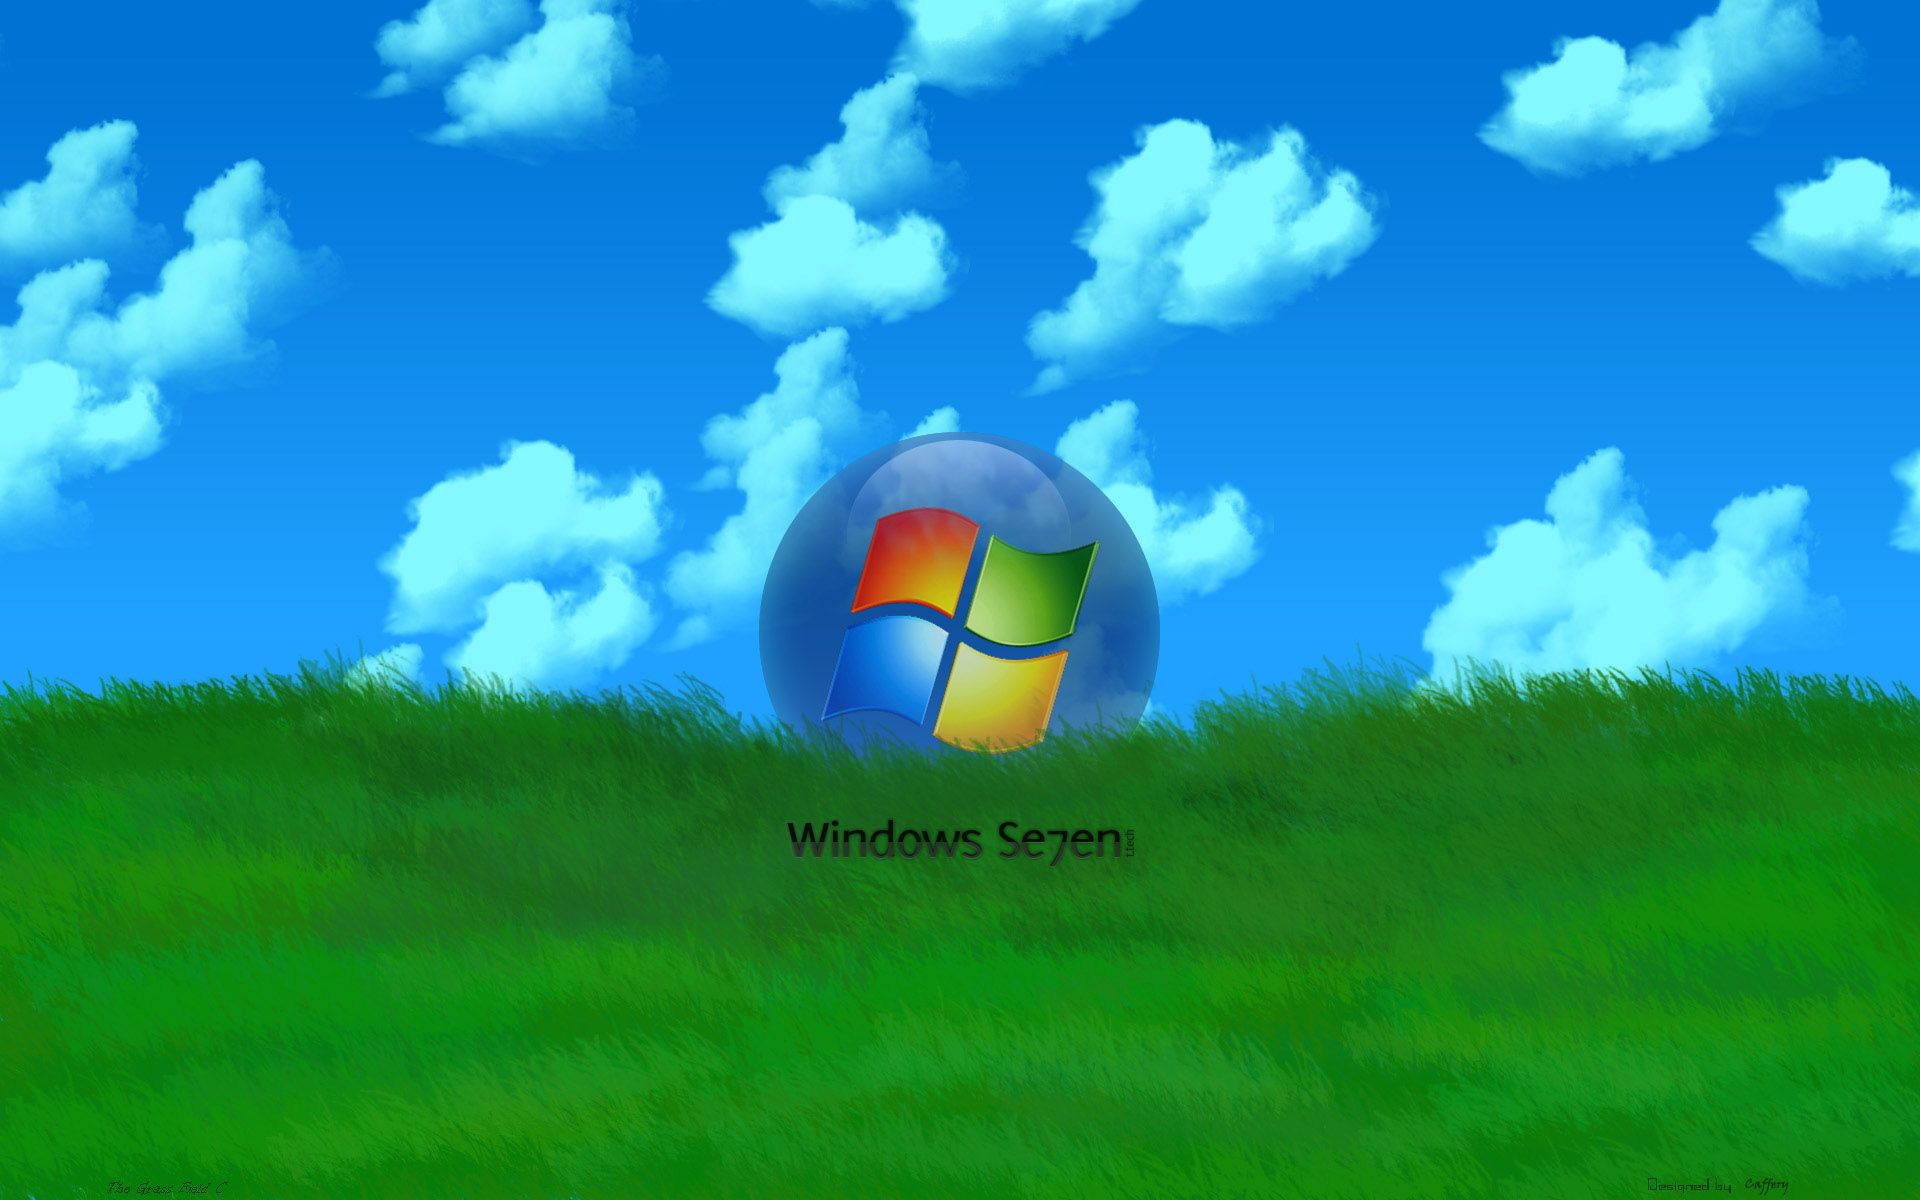 Microsoft Windows 7 grass wallpapers and images - wallpapers